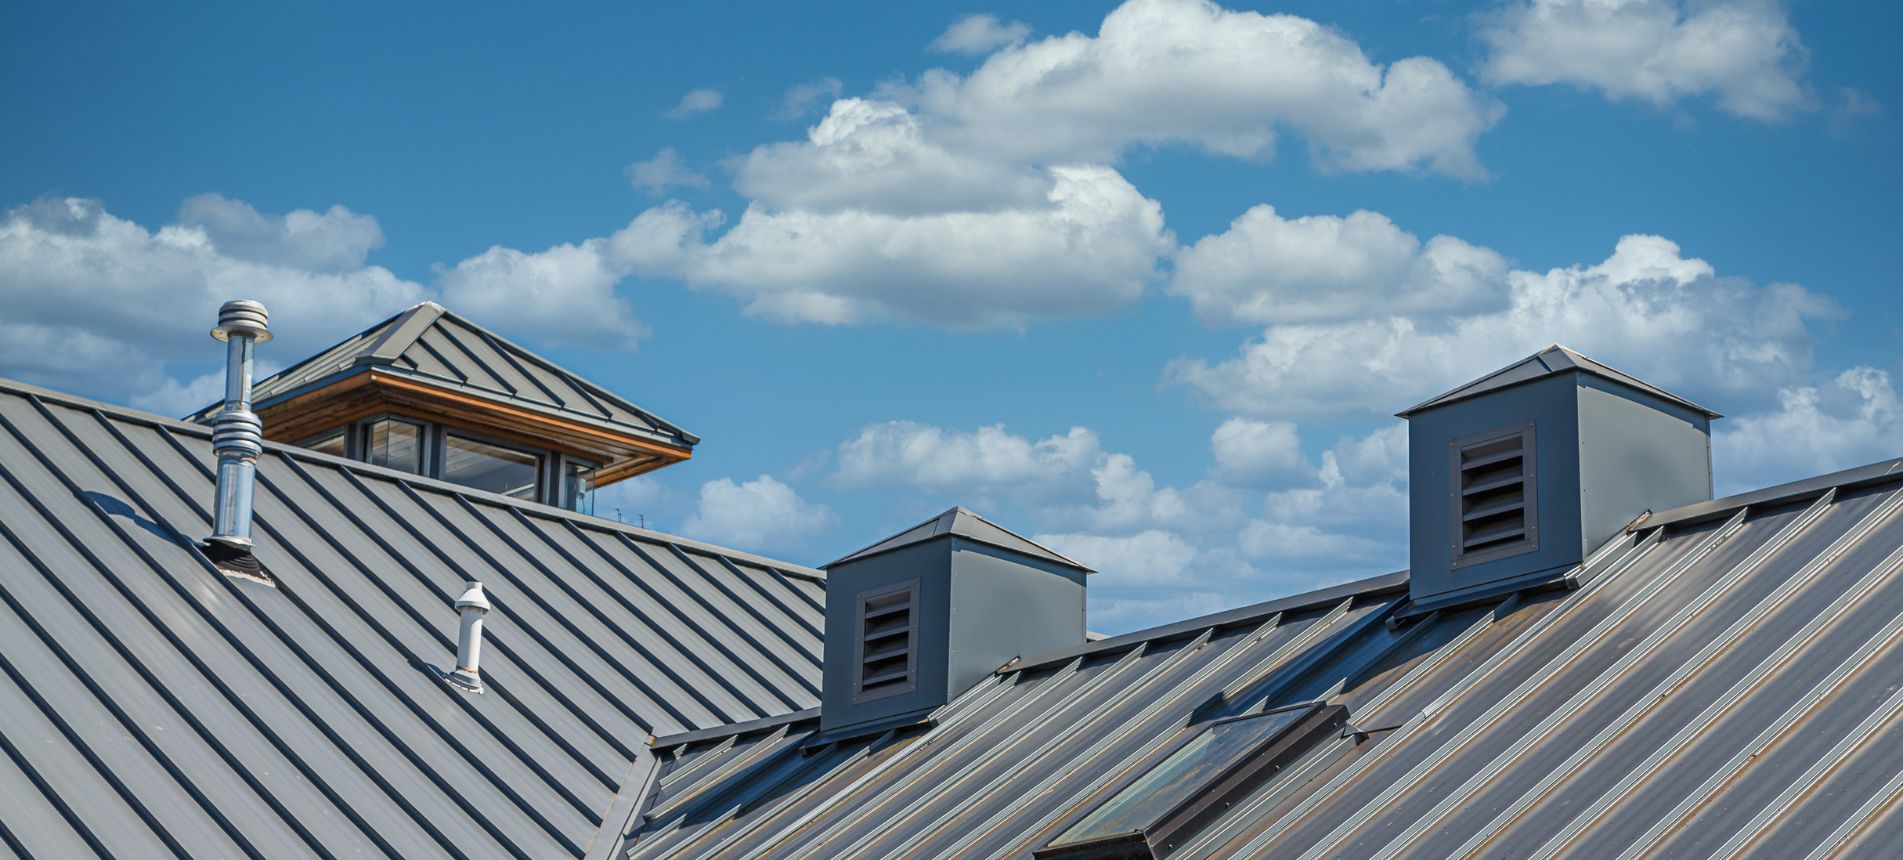 5 Tips for Preparing Metal Roofs for Spring